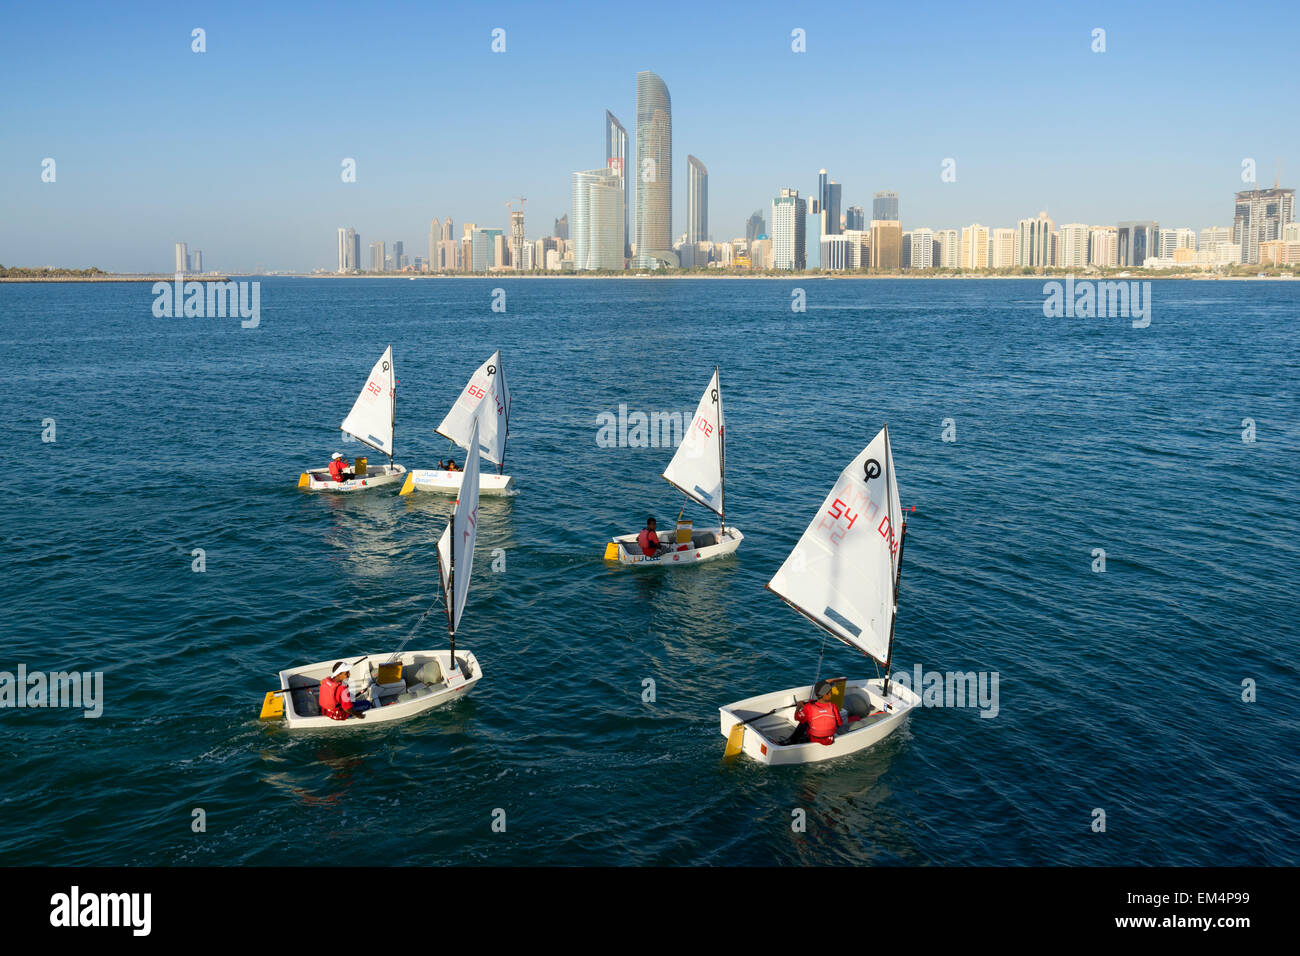 Daytime skyline view and sailing boats in Abu Dhabi in United Arab Emirates Stock Photo